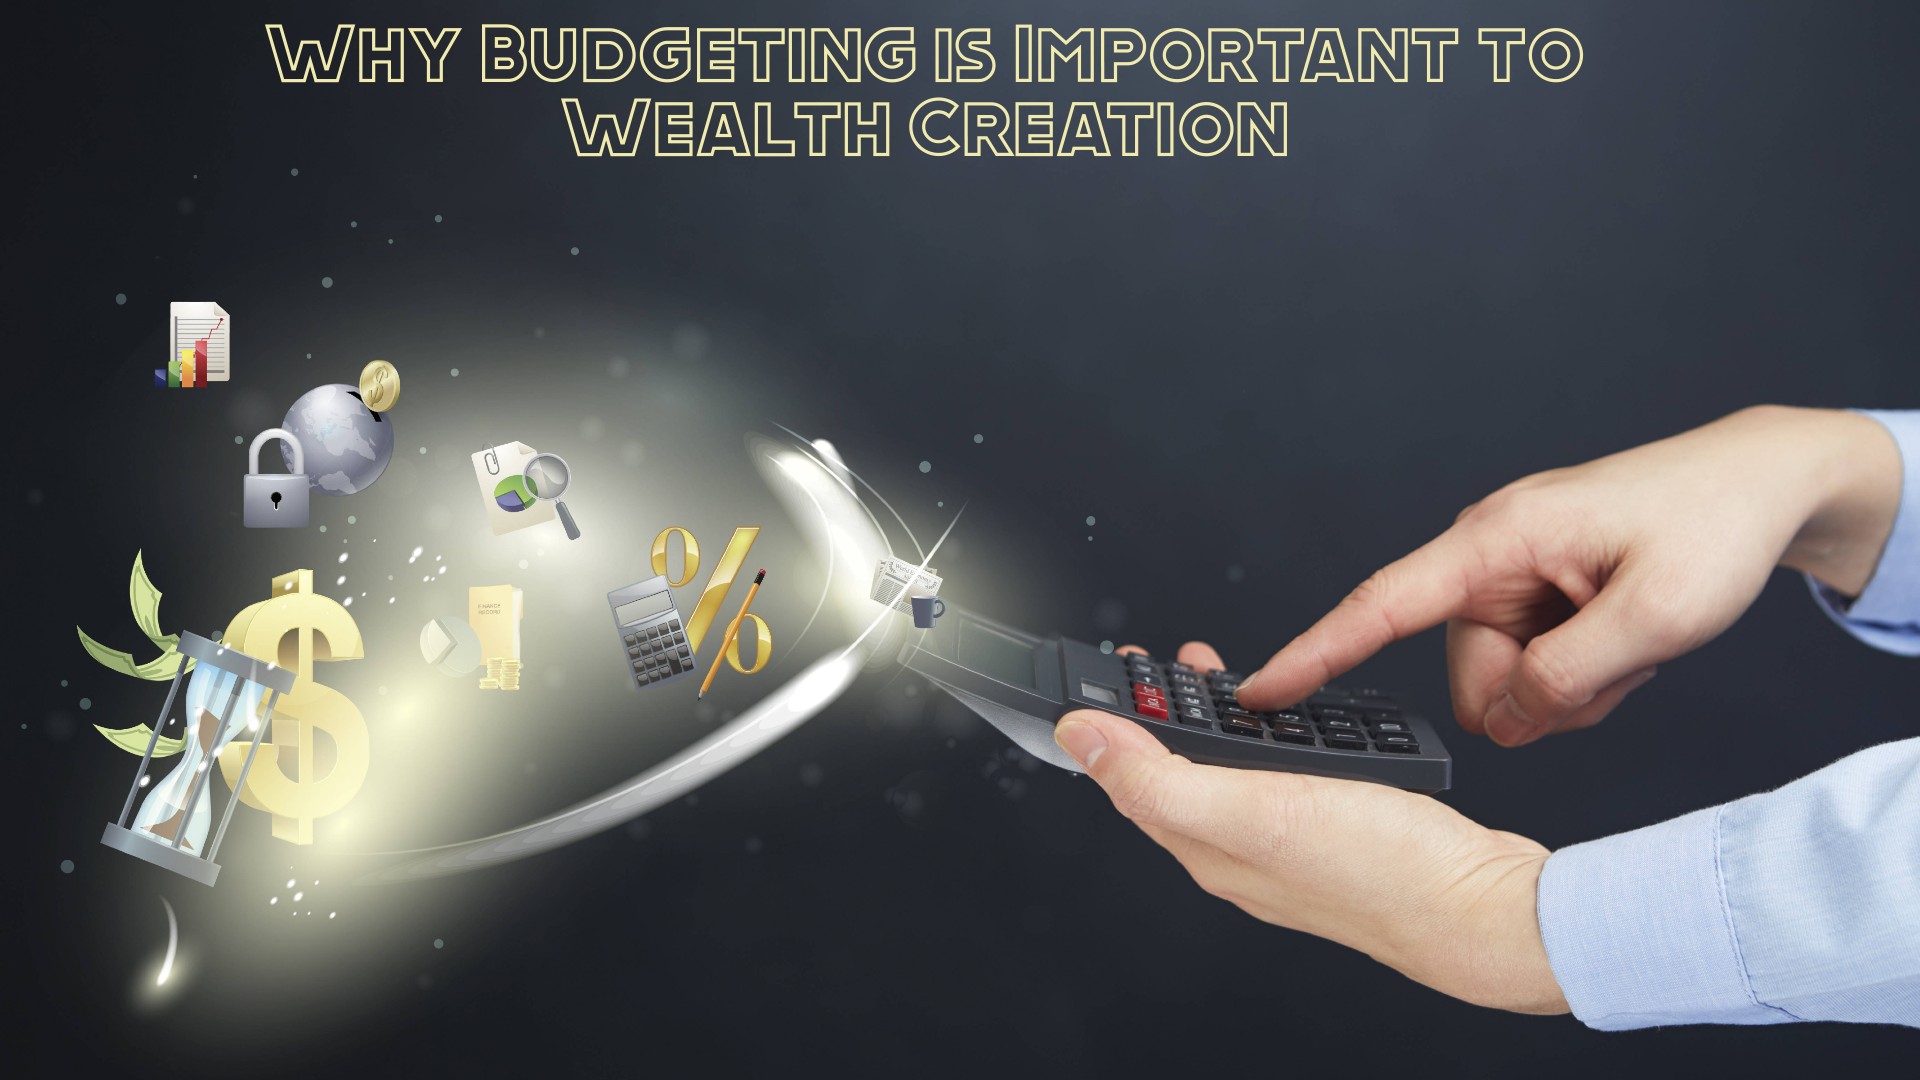 Why Budgeting is Important to Wealth Creation